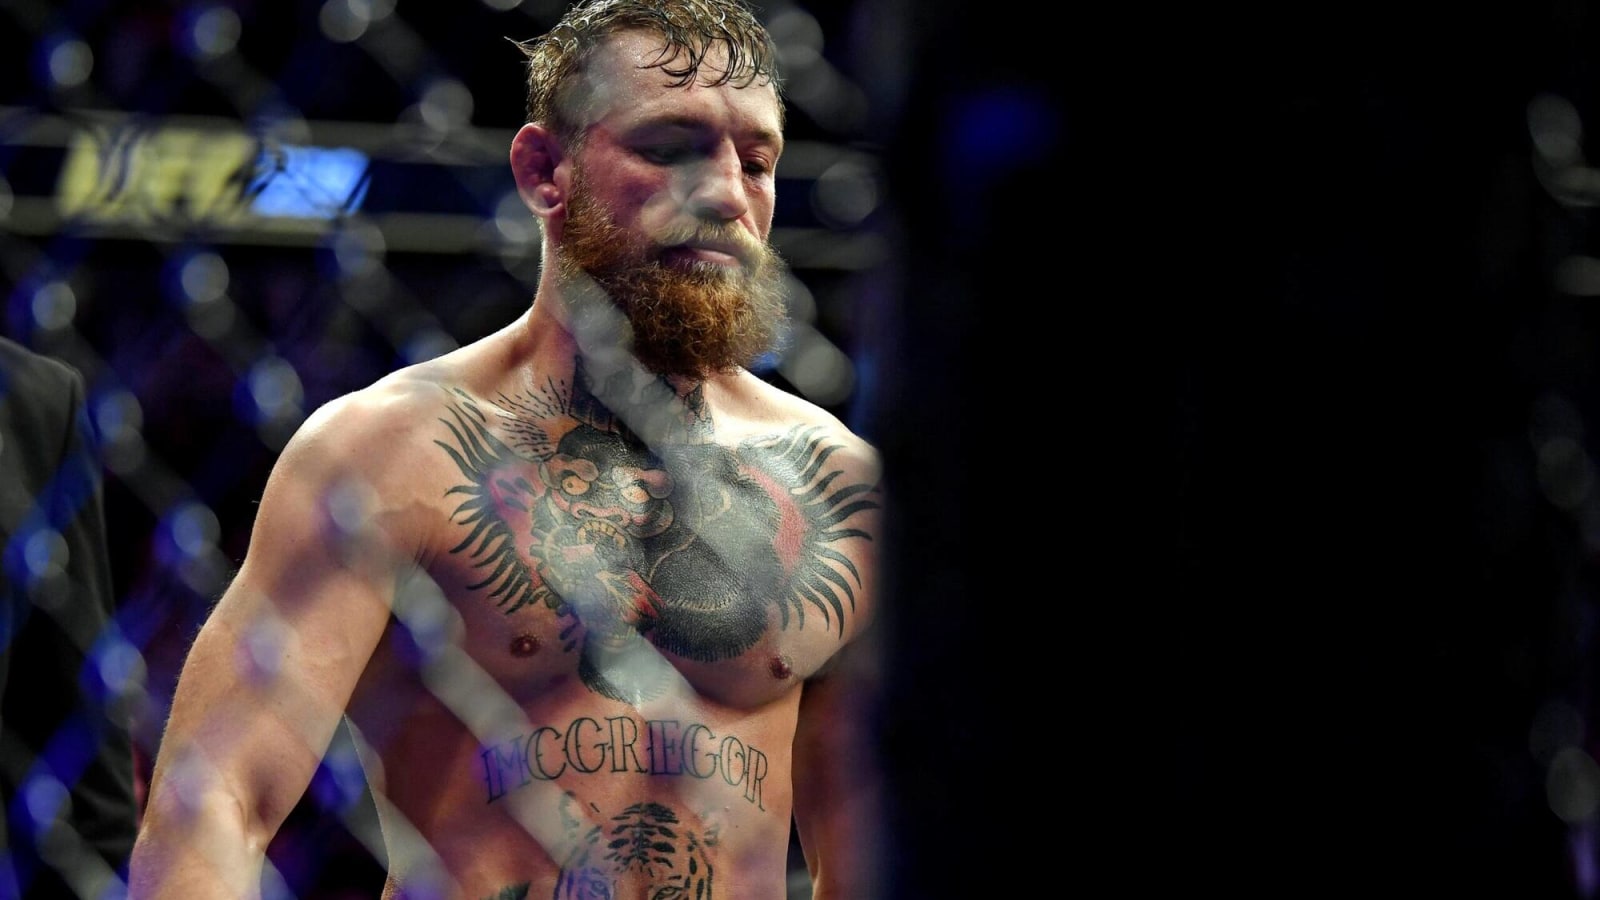 Watch: Conor McGregor Seems Frighteningly Unwell in New Interview Ahead of Planned UFC Return This Summer